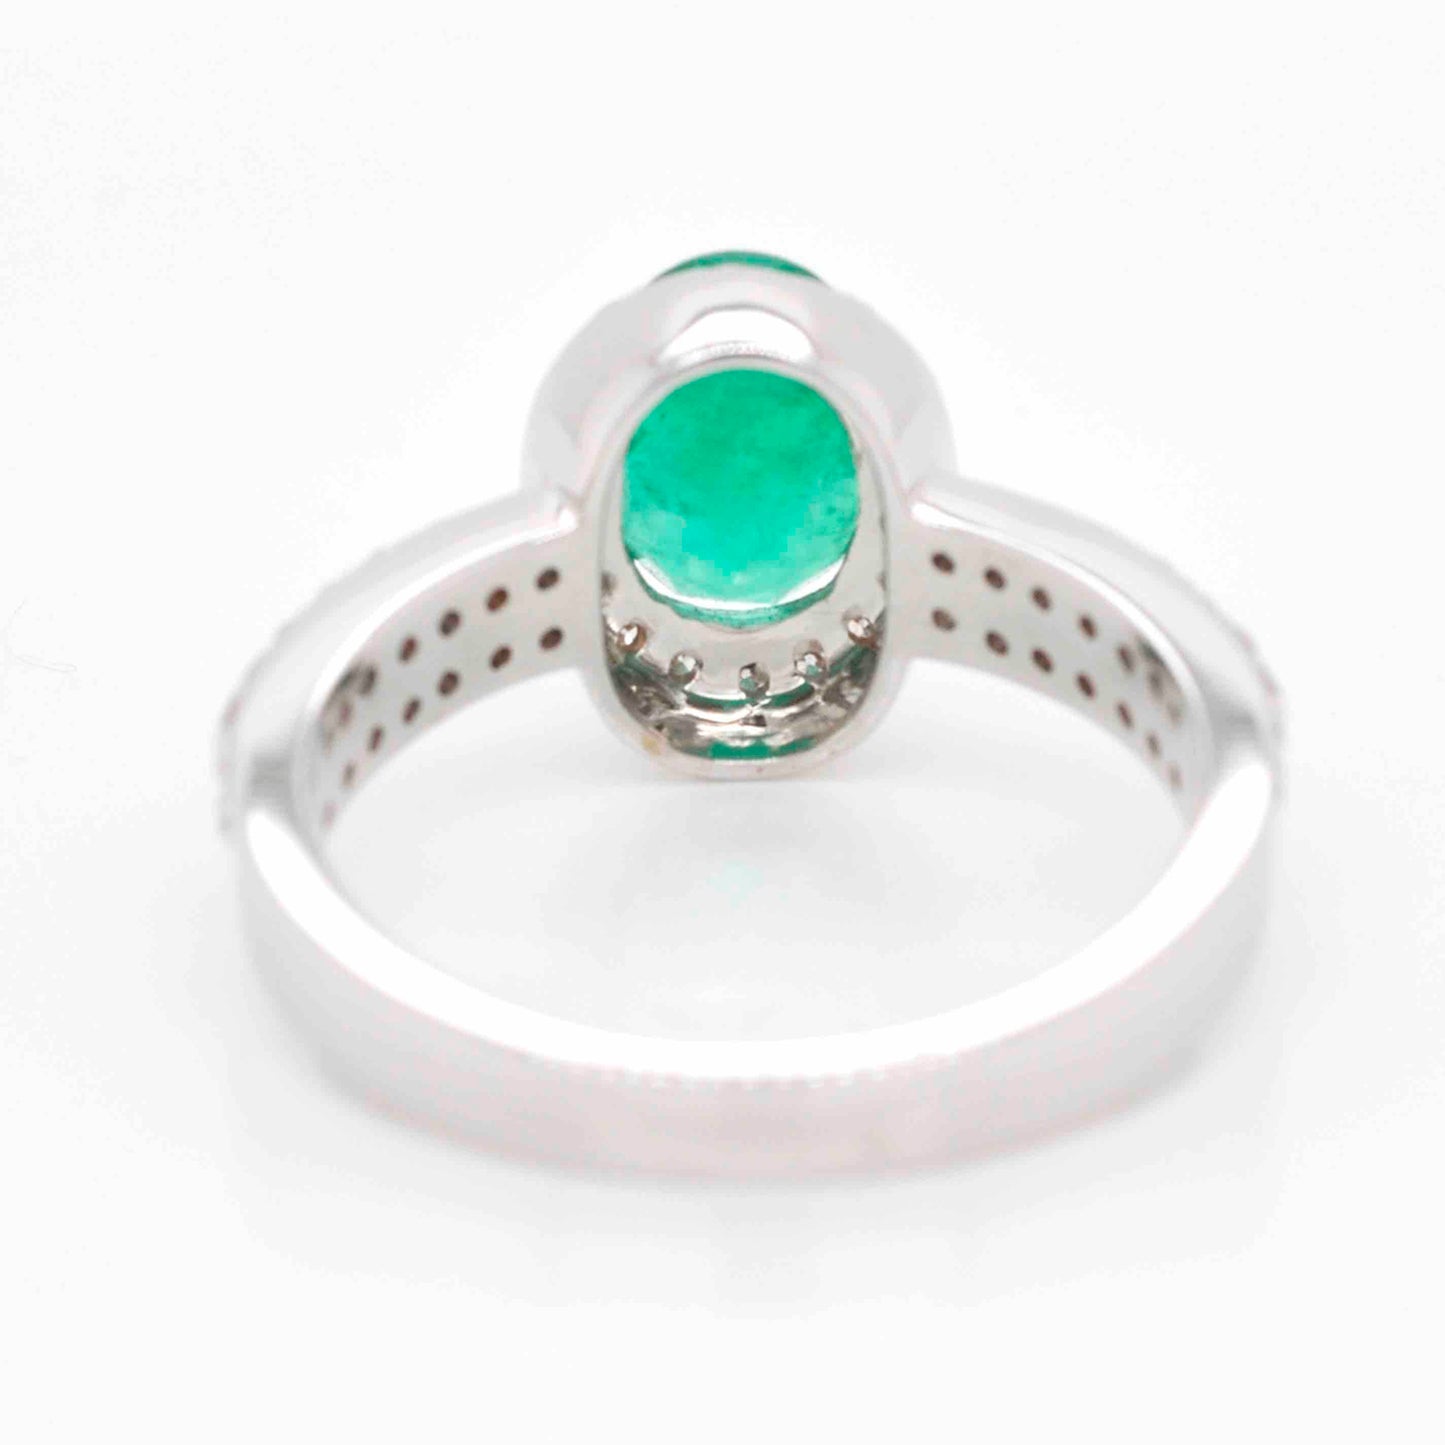 Sparkling Columbian Emerald  Diamond Ring with a vibrant green hue